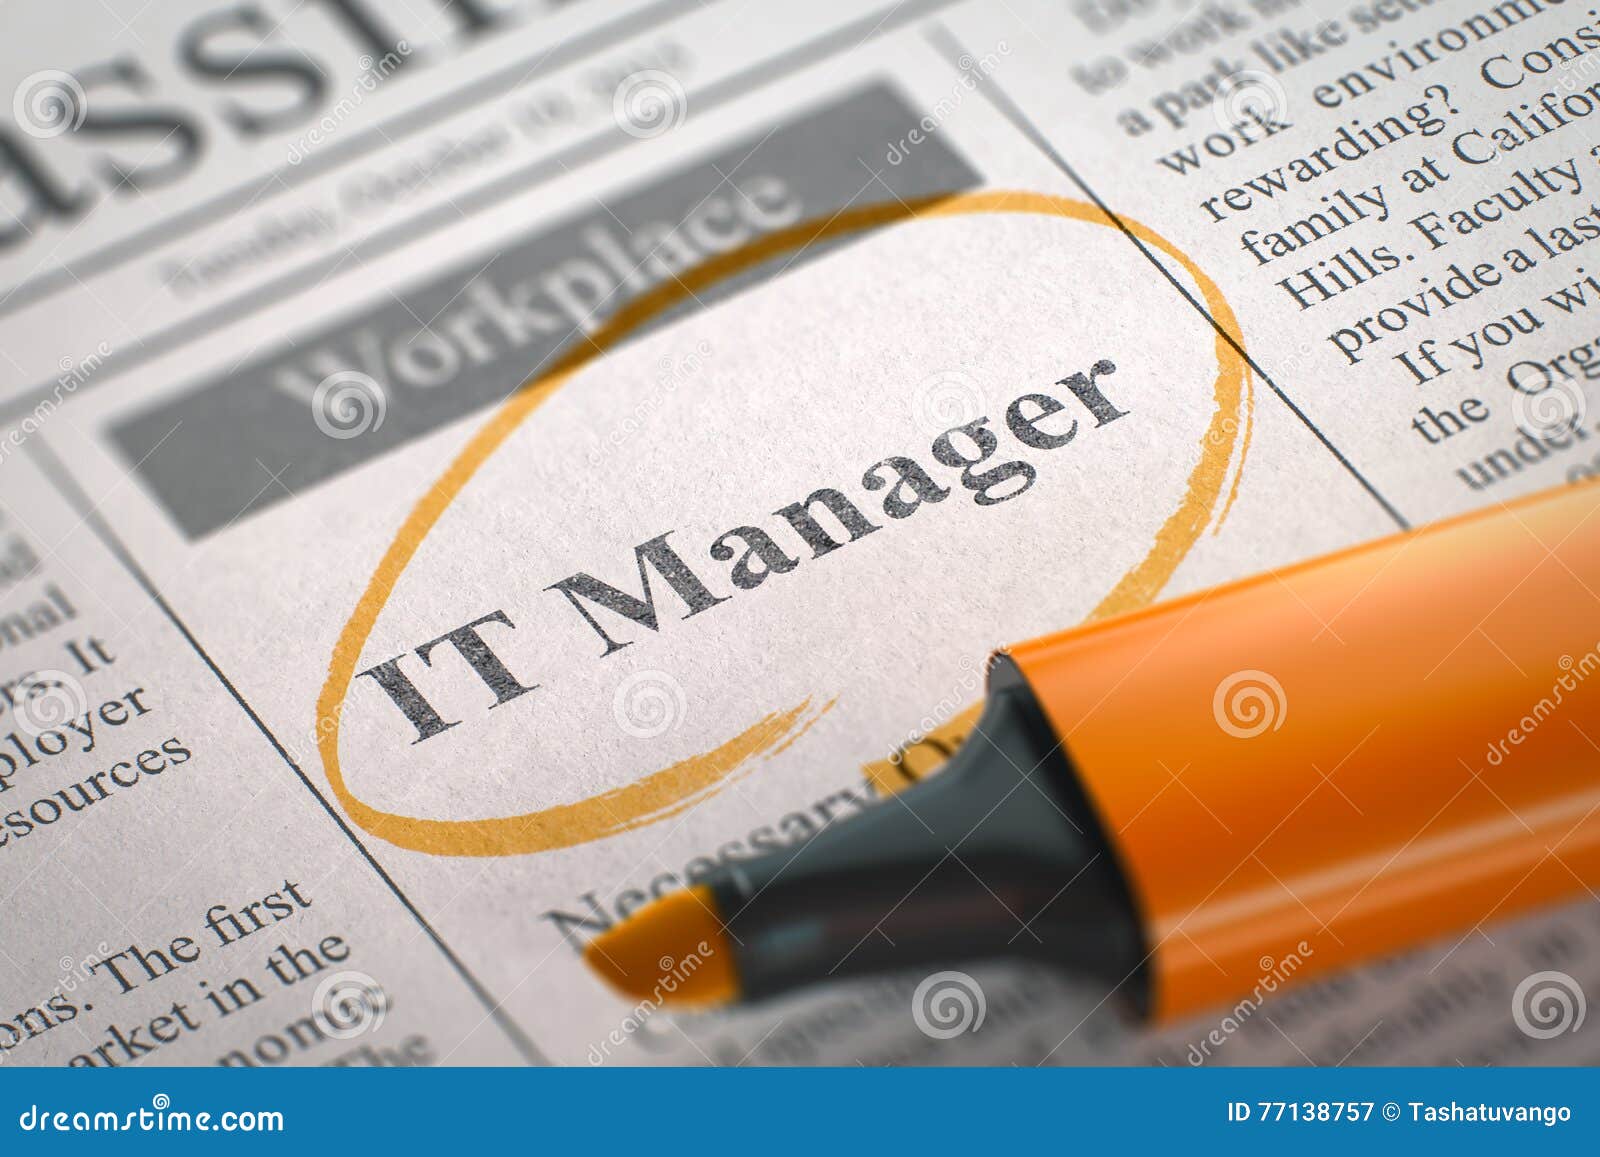 Image result for hiring IT Manager